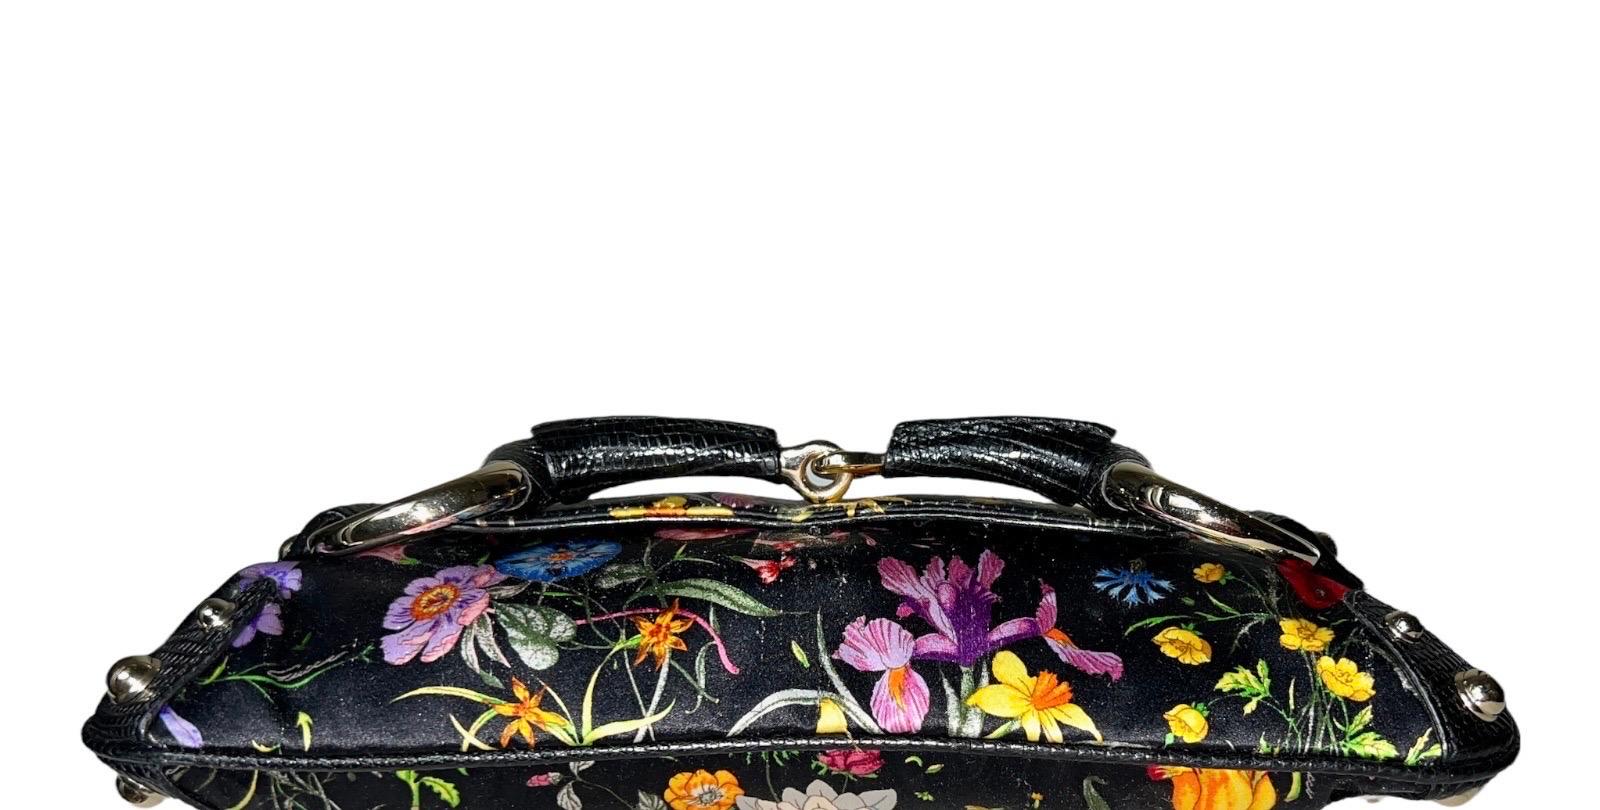 GUCCI Limited Edition Exotic Lizard Satin Flora Print Horsebit Bag Clutch In Good Condition For Sale In Switzerland, CH